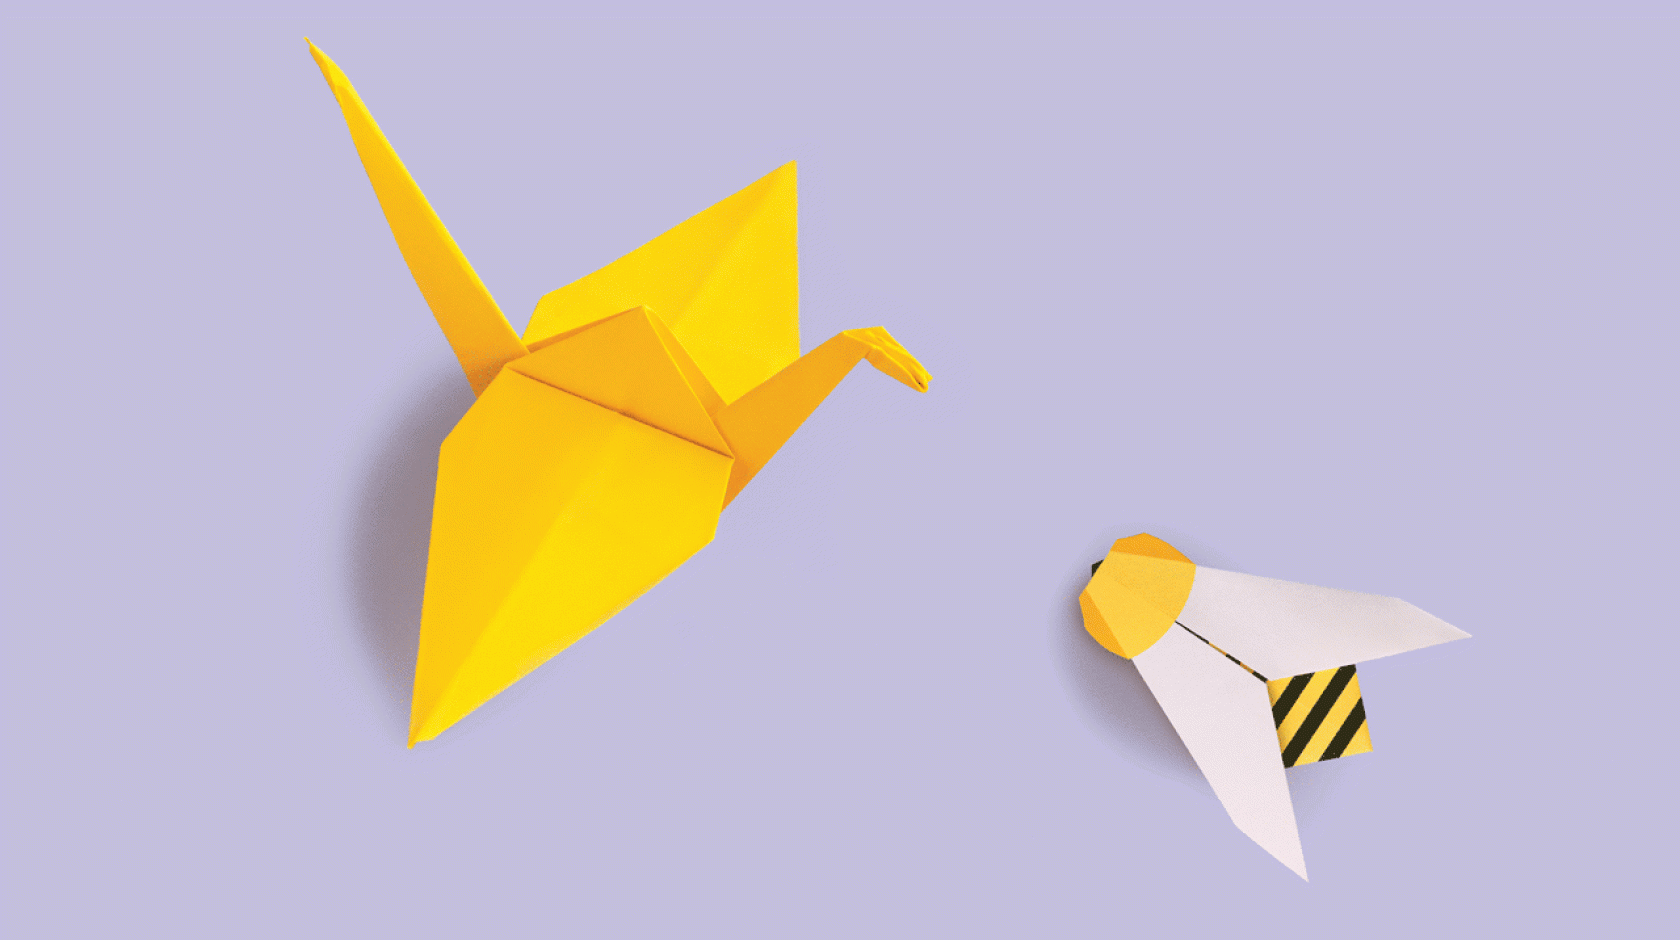 Origami crane and bee face each other